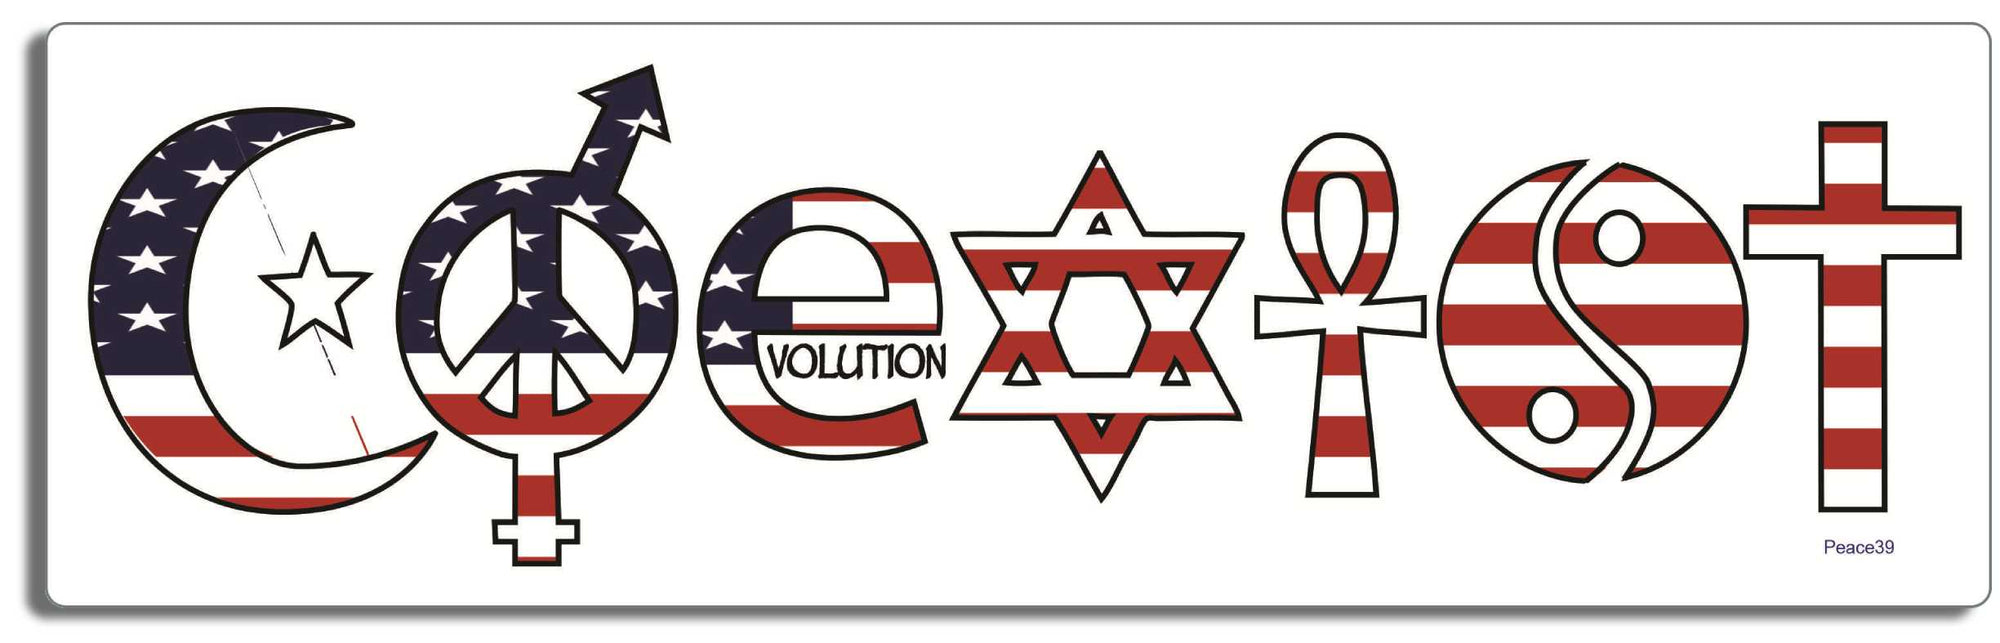 Coexist - USA - 3" x 10" Bumper Sticker--Car Magnet- -  Decal Bumper Sticker-peace Bumper Sticker Car Magnet Coexist-USA-    Decal for cars#resistance, american flag, anti racism, democrat, liberal, love america, love and peace, patriot, patriotic, peace, Politics, stars and stripes